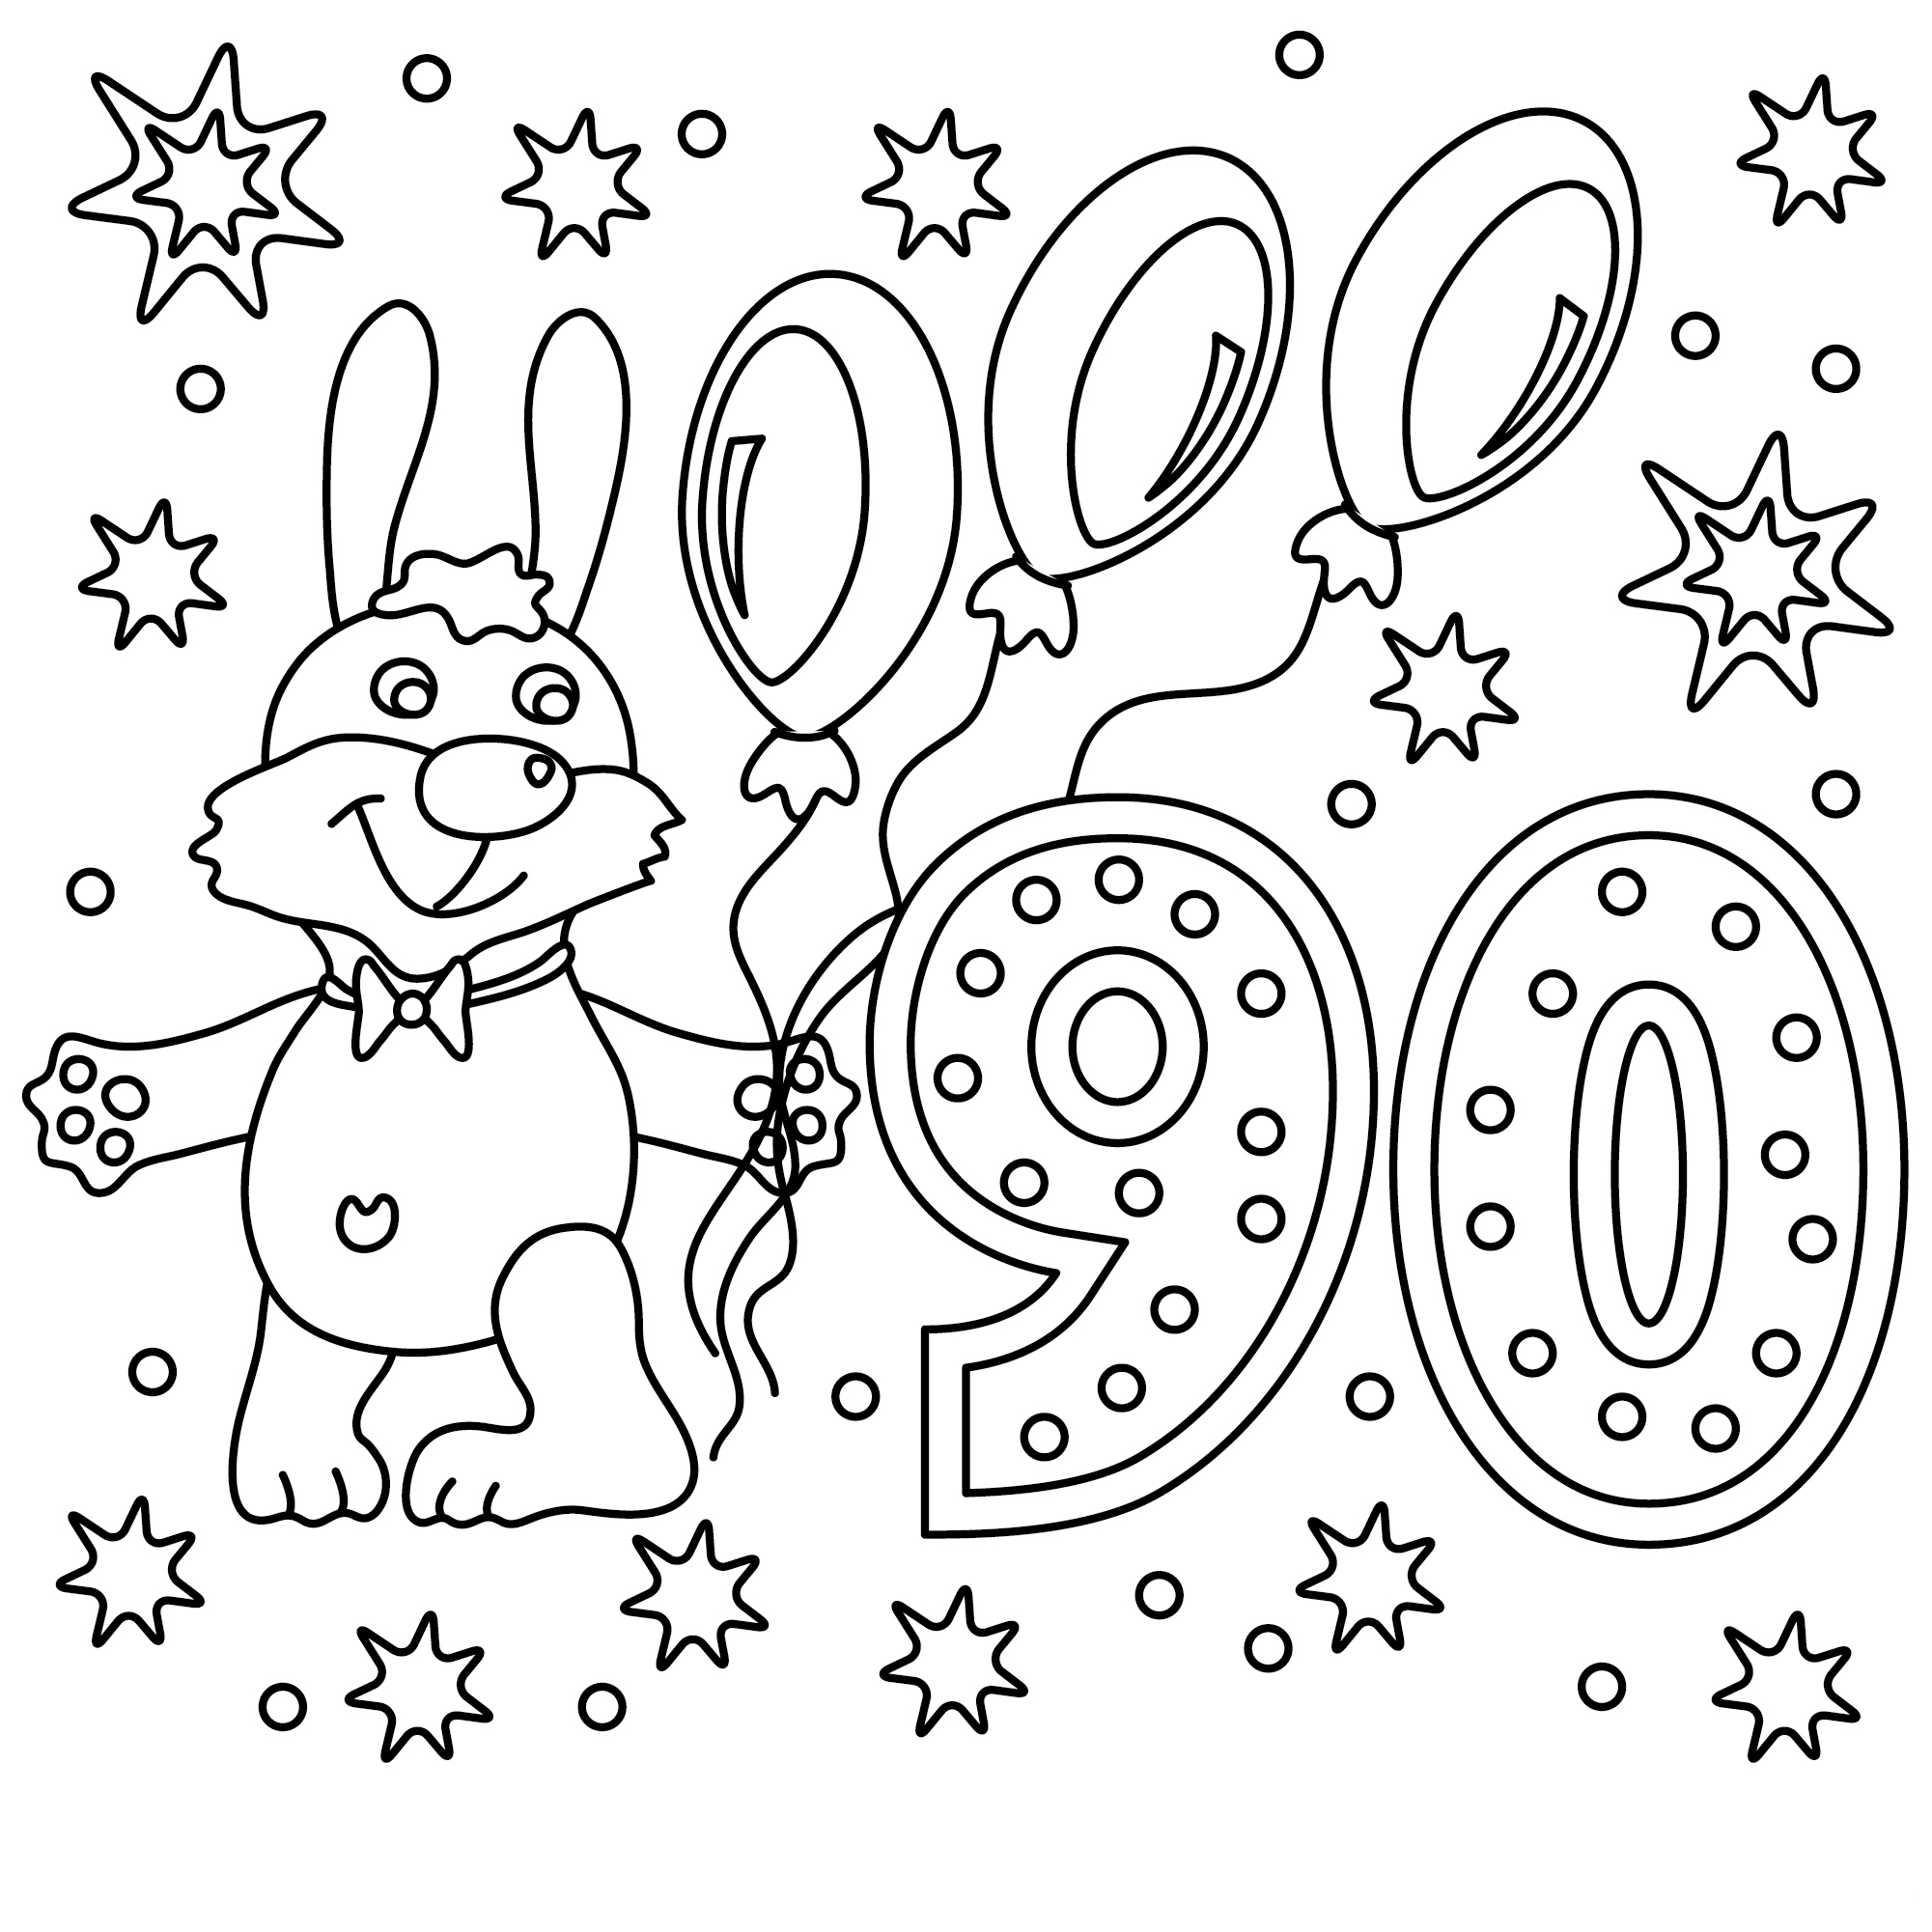 Happy 90th birthday Coloring Page